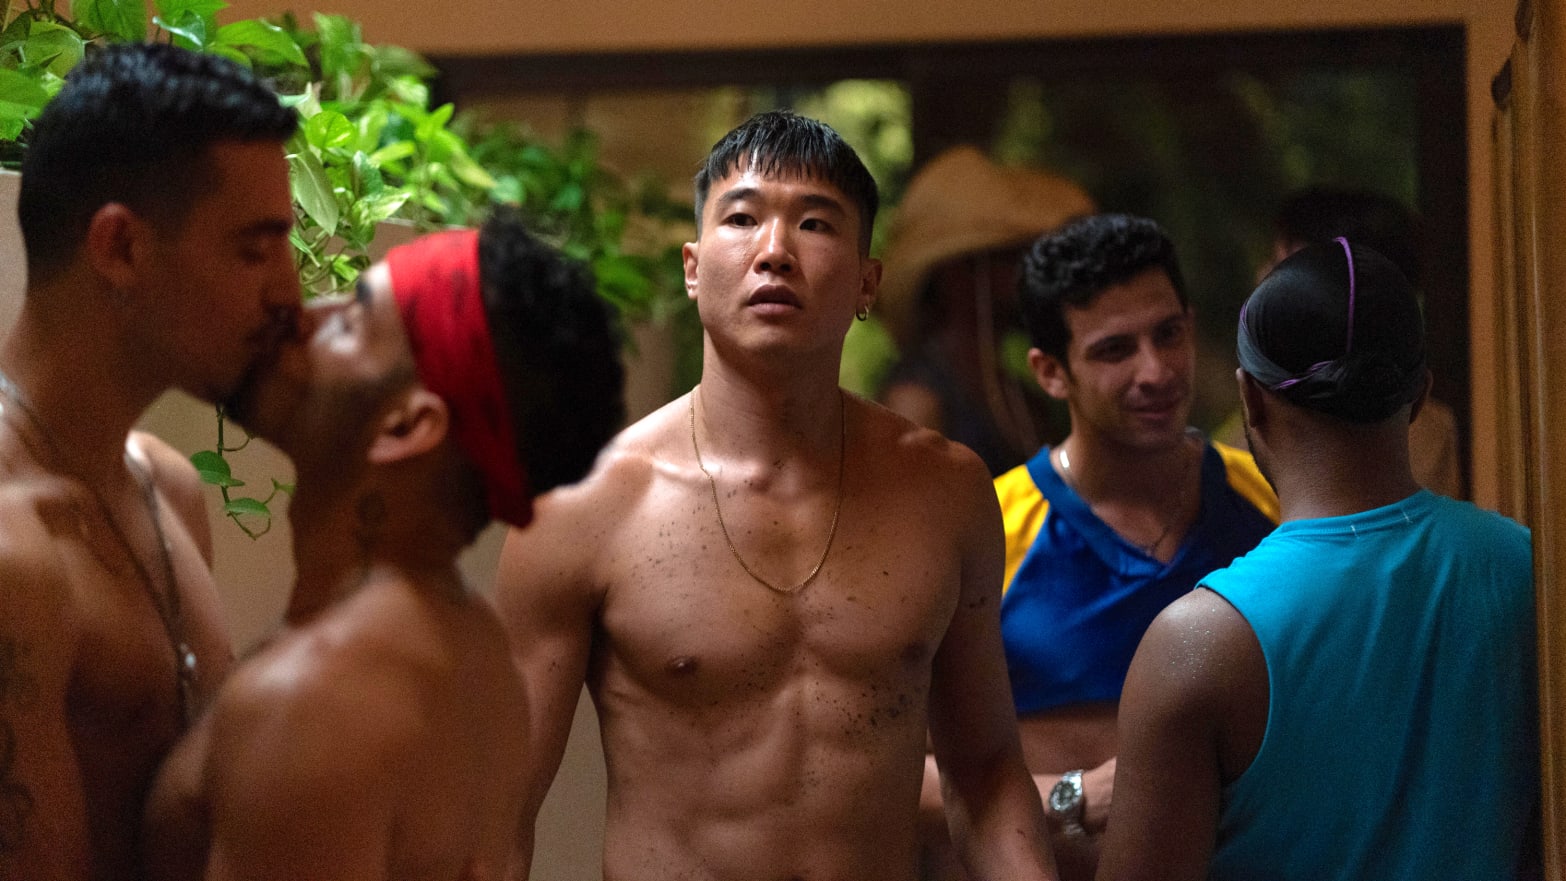 Fire Island Is Yet Another Movie Featuring Fit Gay image pic